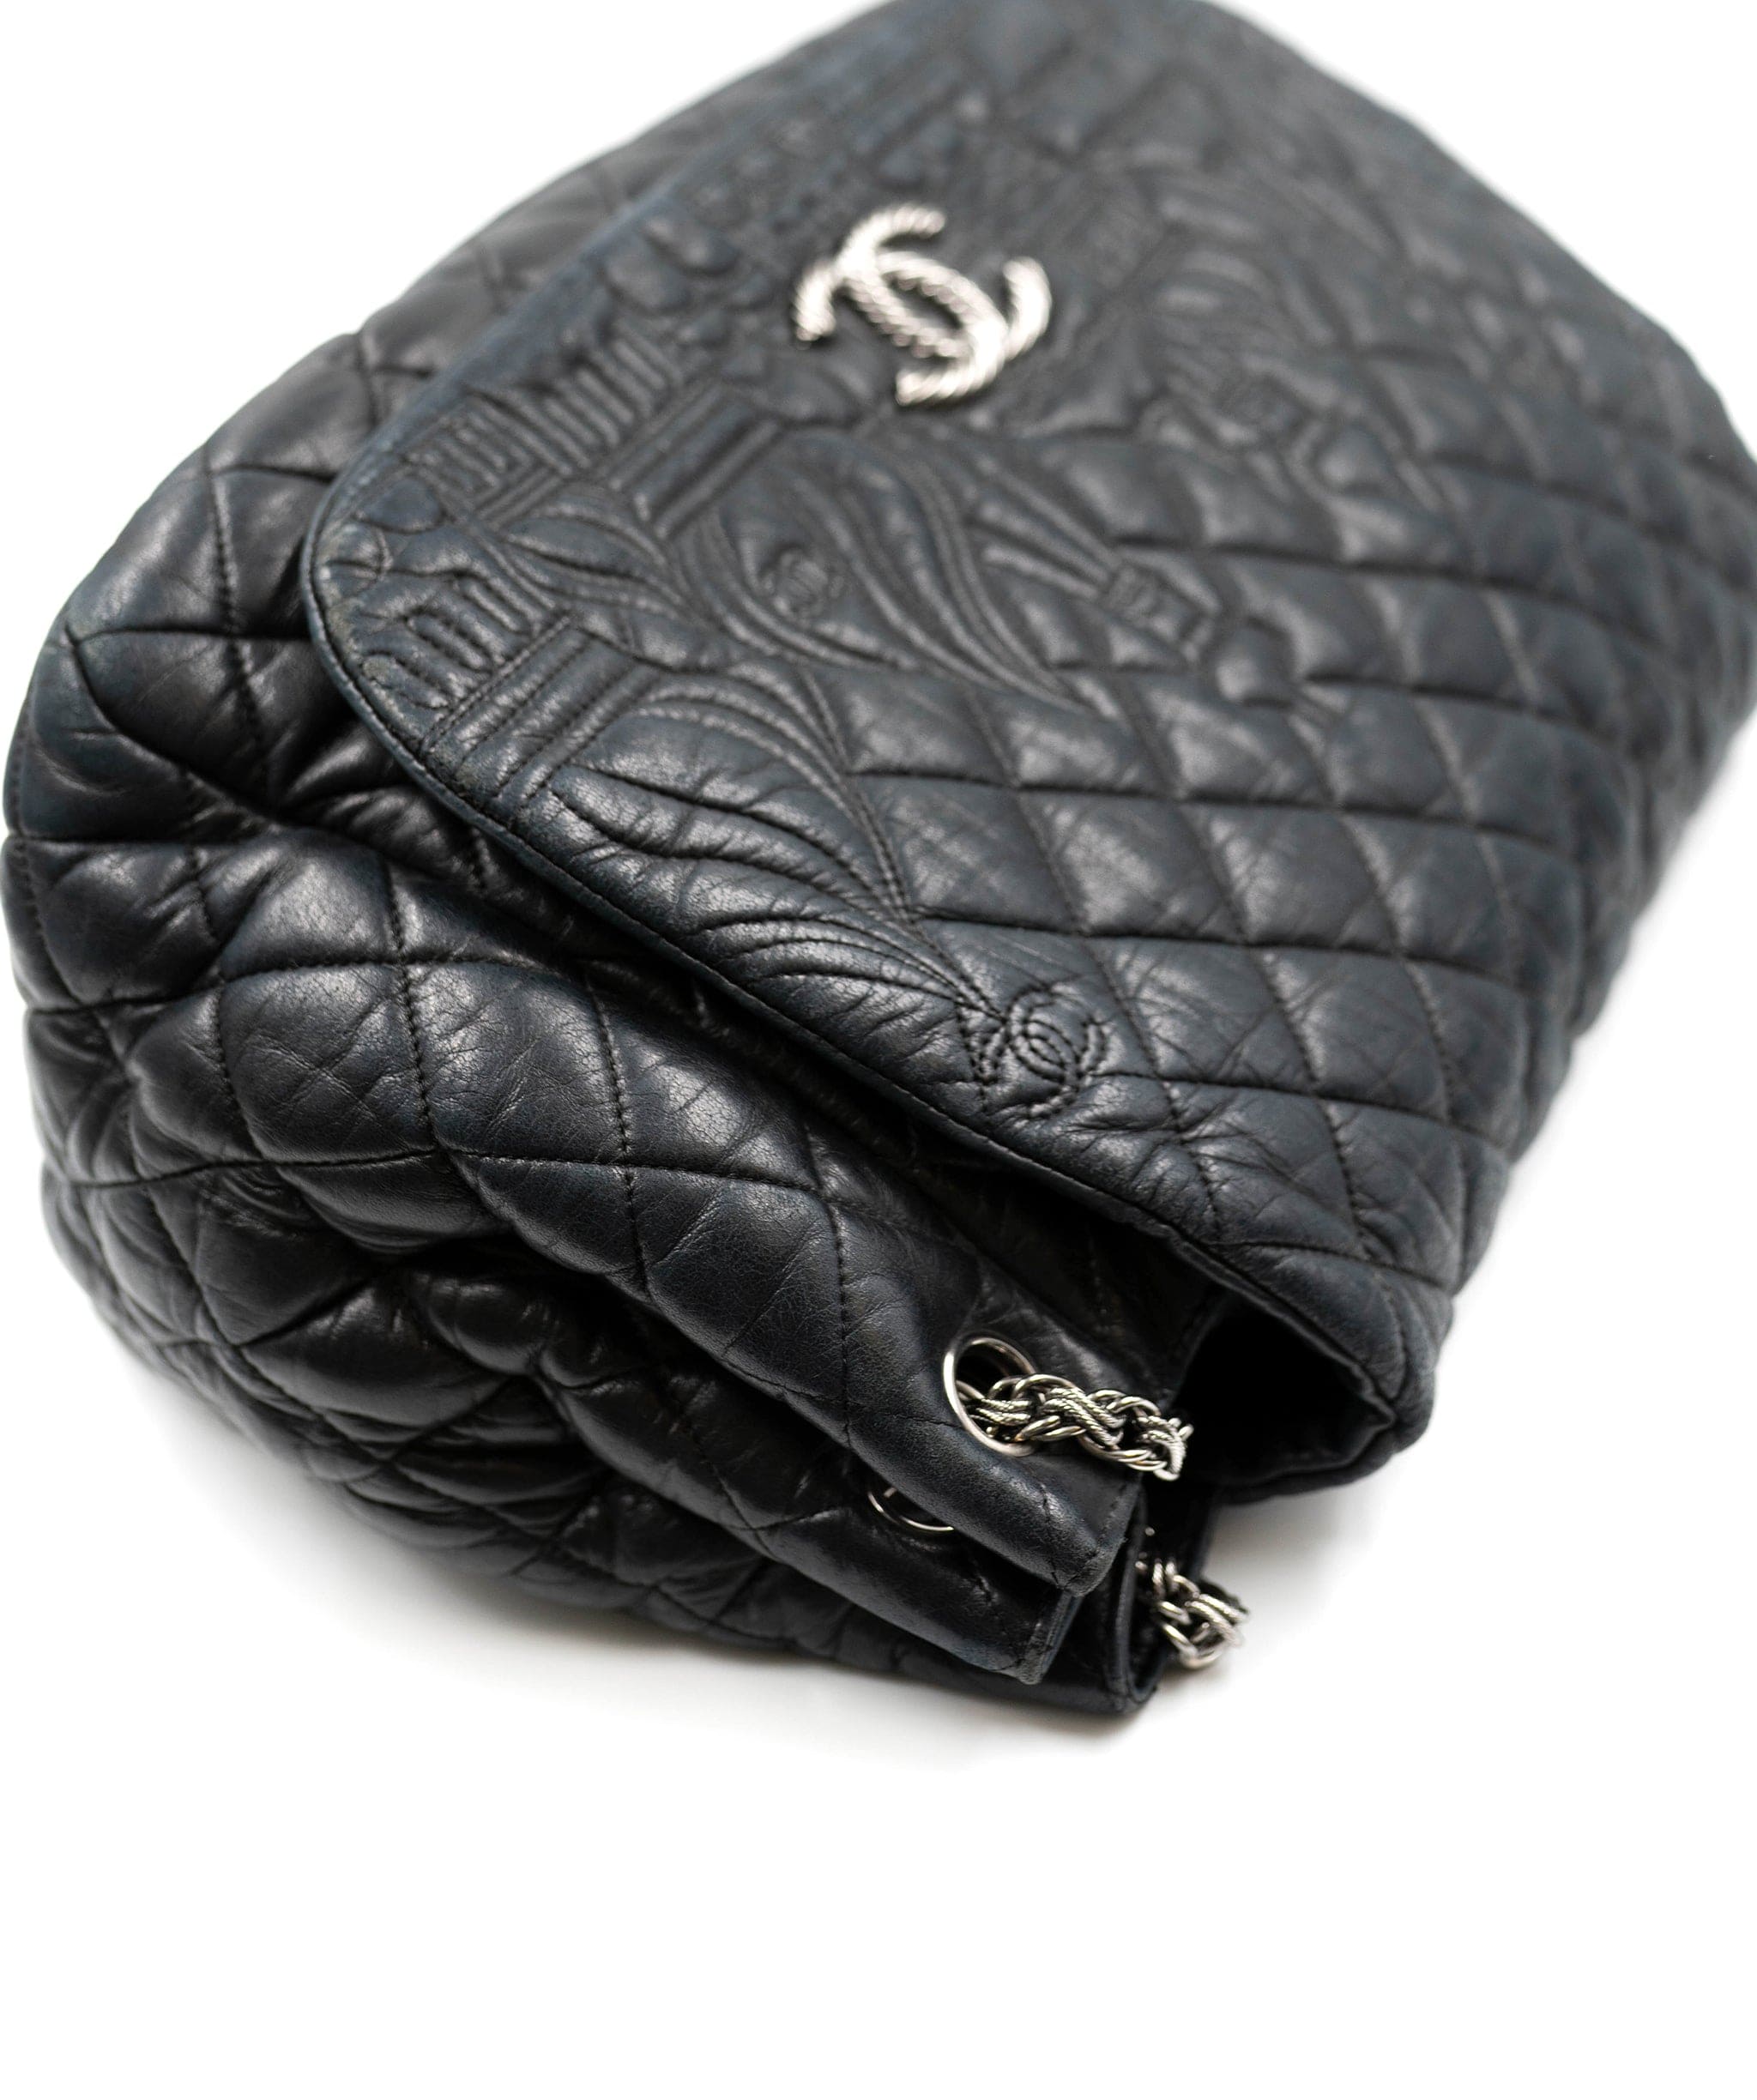 Chanel Chanel Moscow Paris Bag  ALL0073